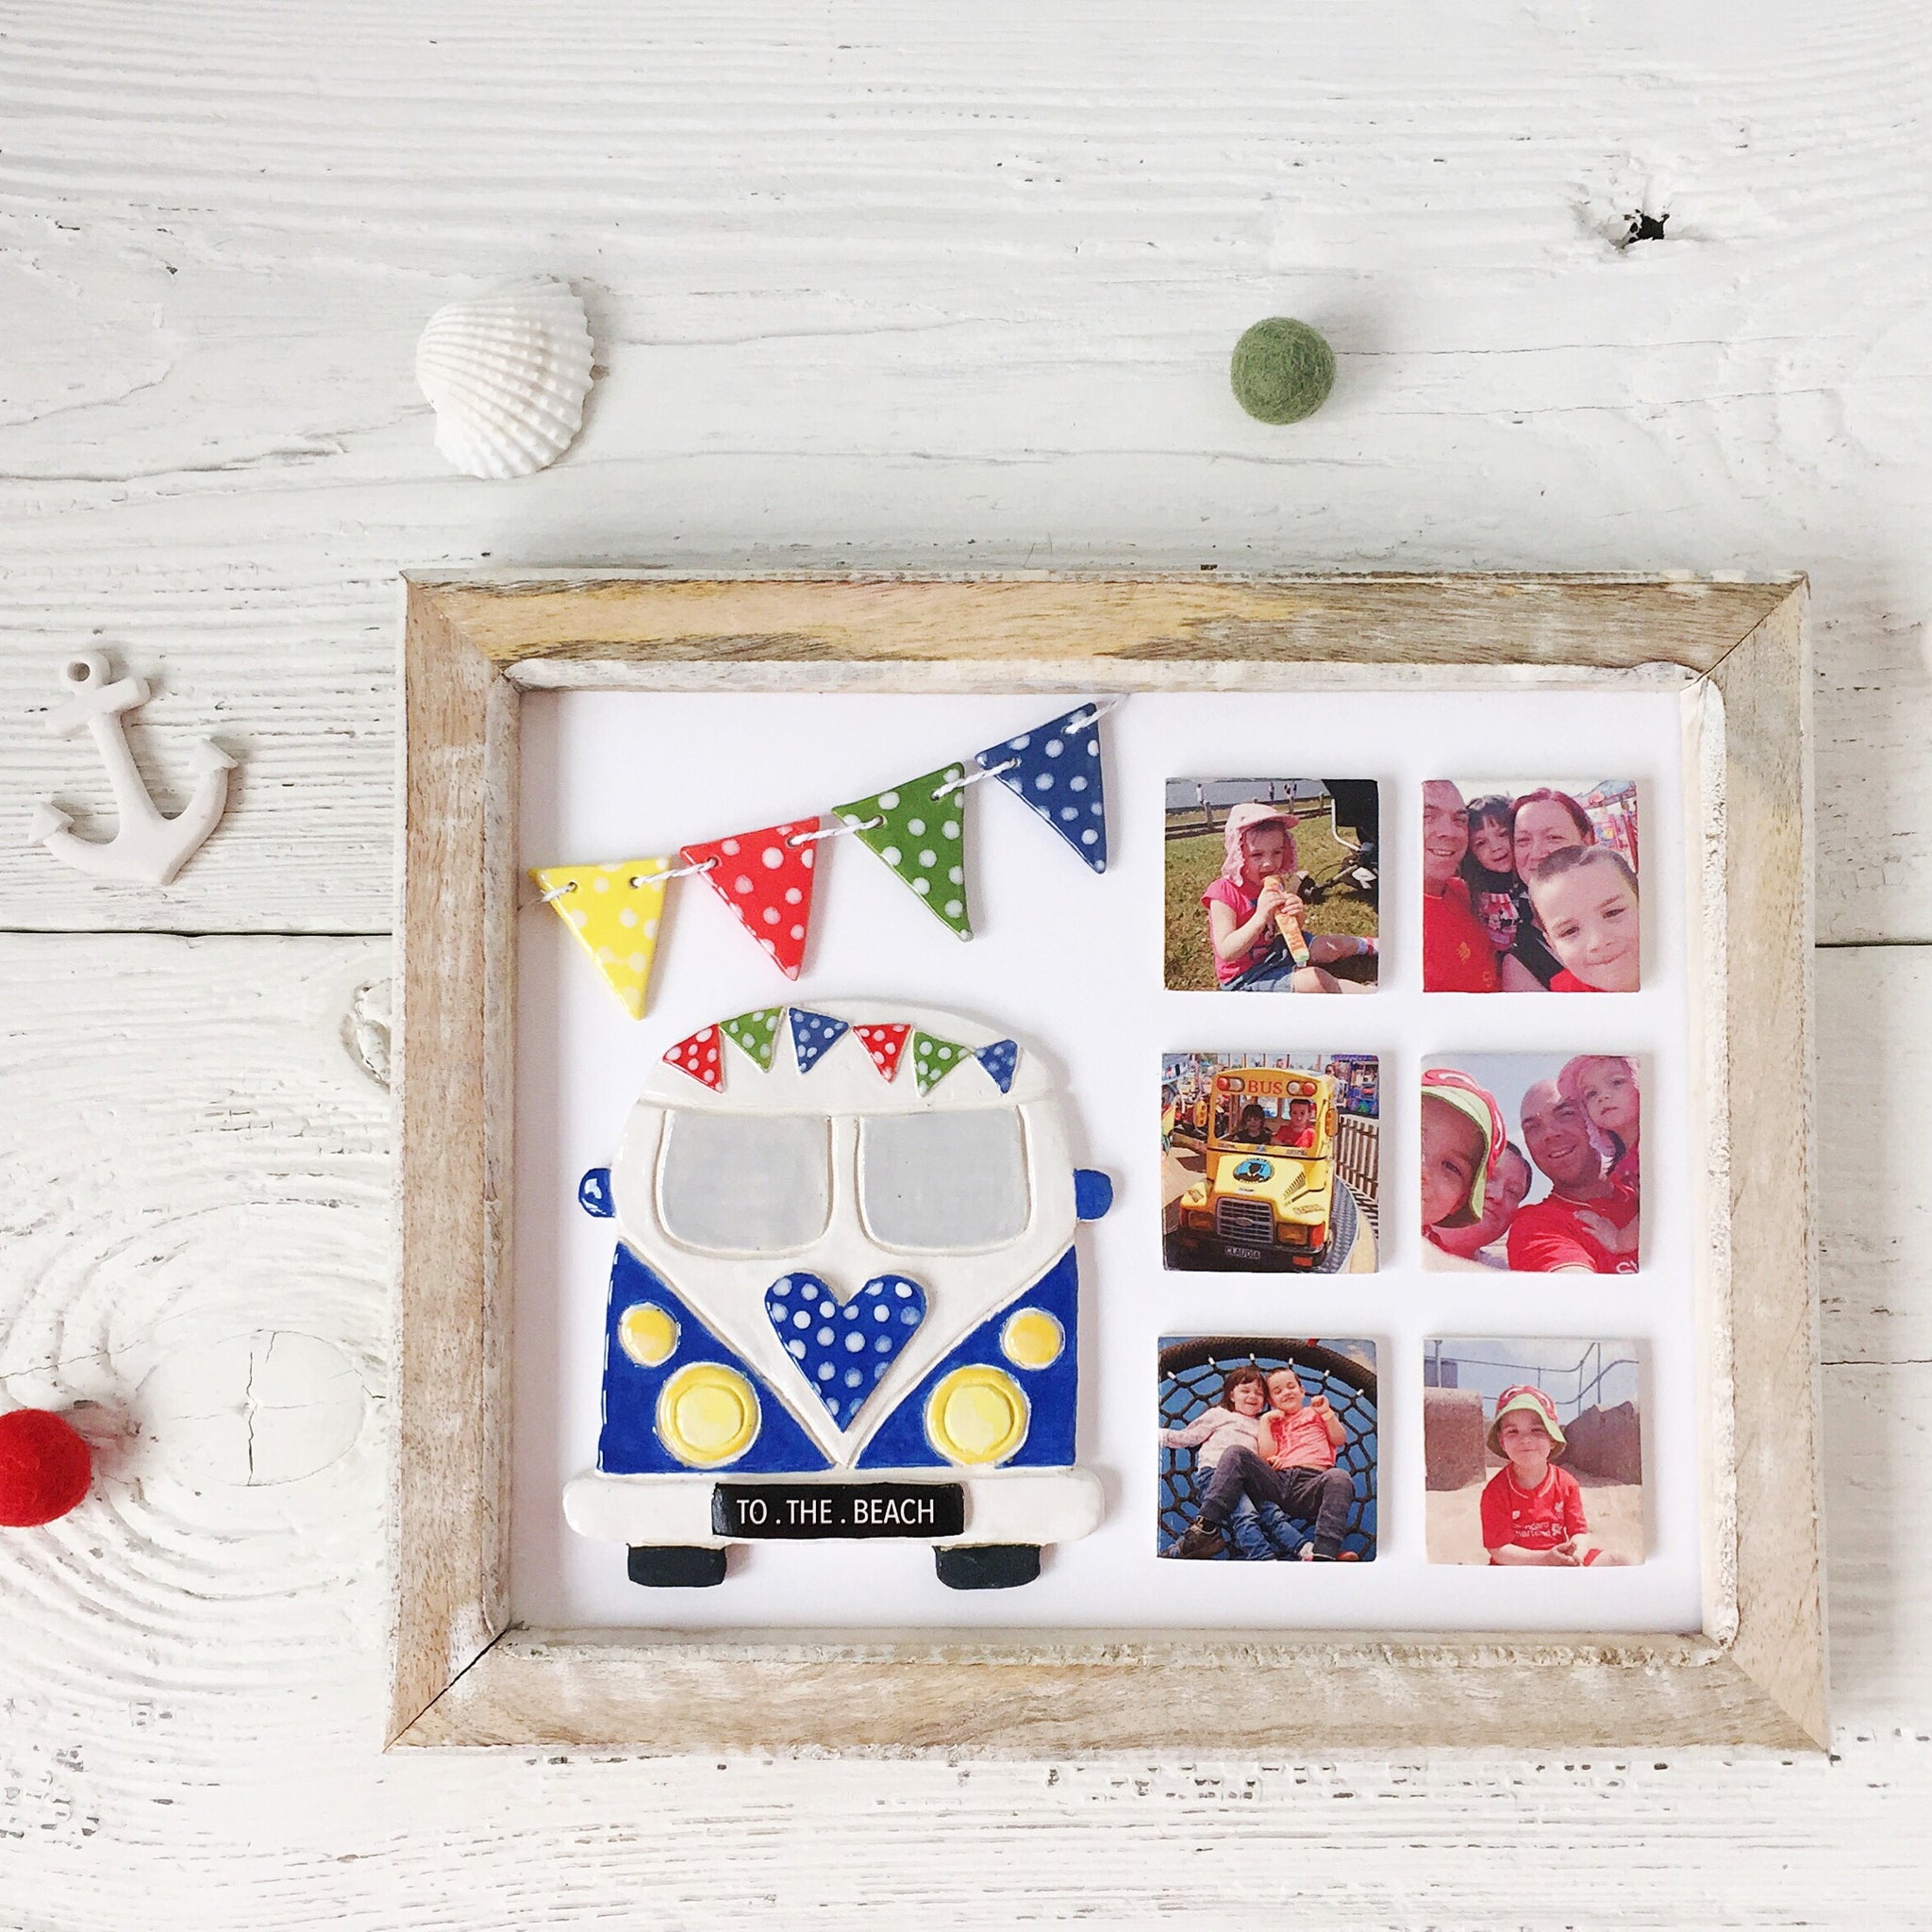 Periwinkle and Clay Campervan Themed Frame - The original